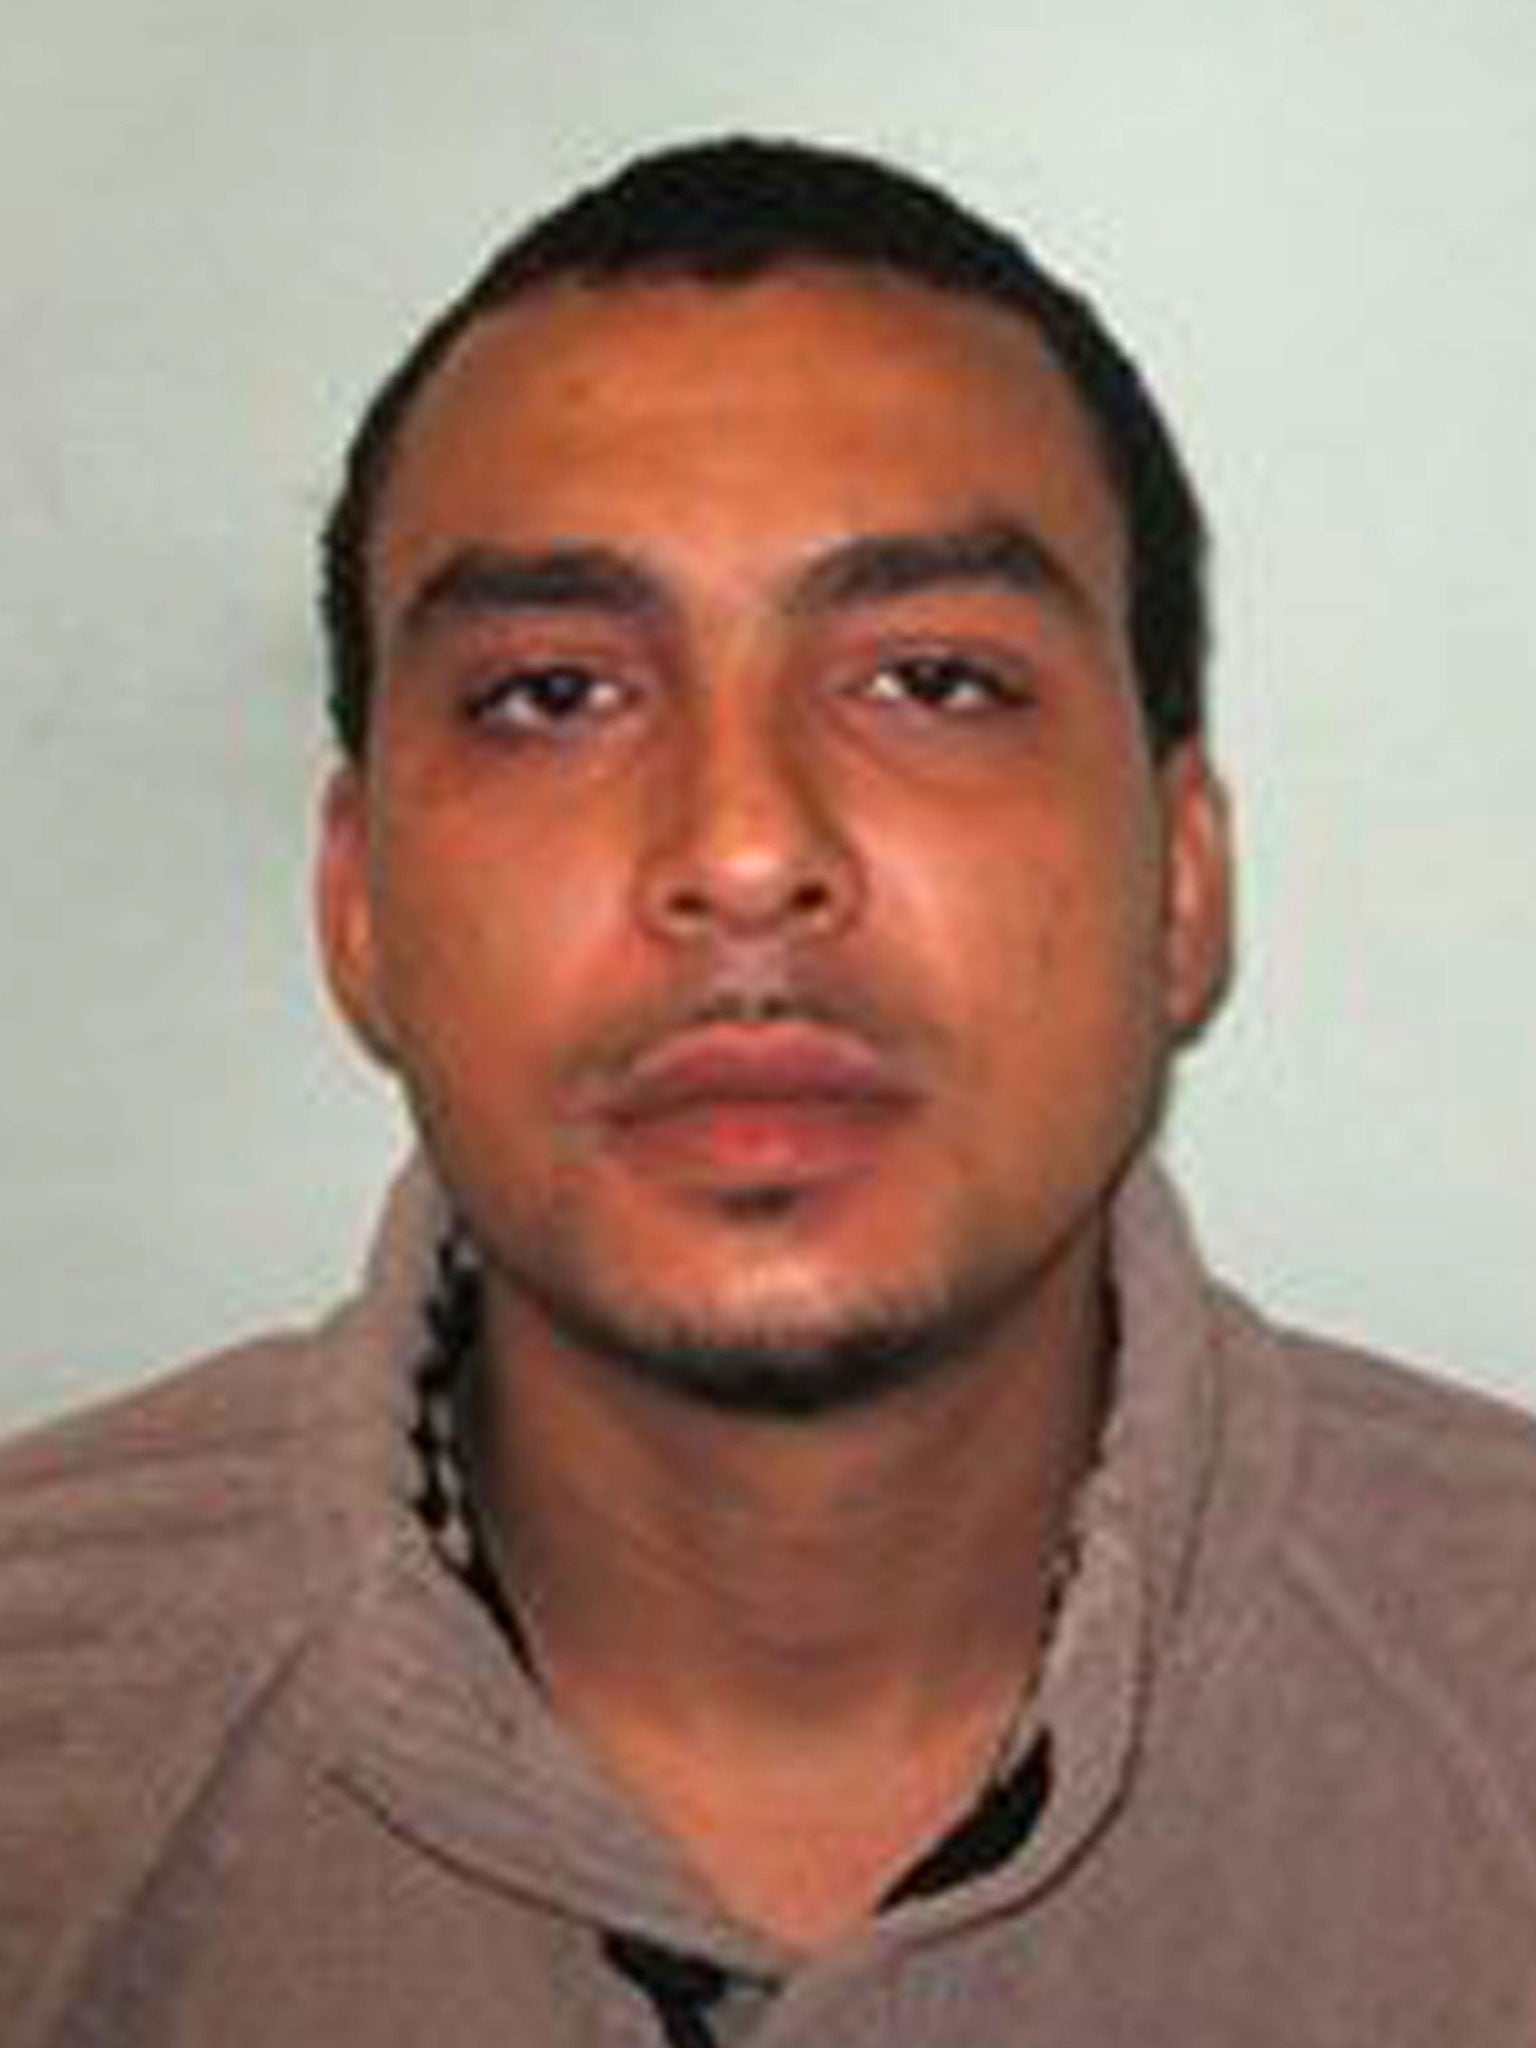 Sussex Police want to speak with Christopher Jeffrey-Shaw and are warning the public not to approach him